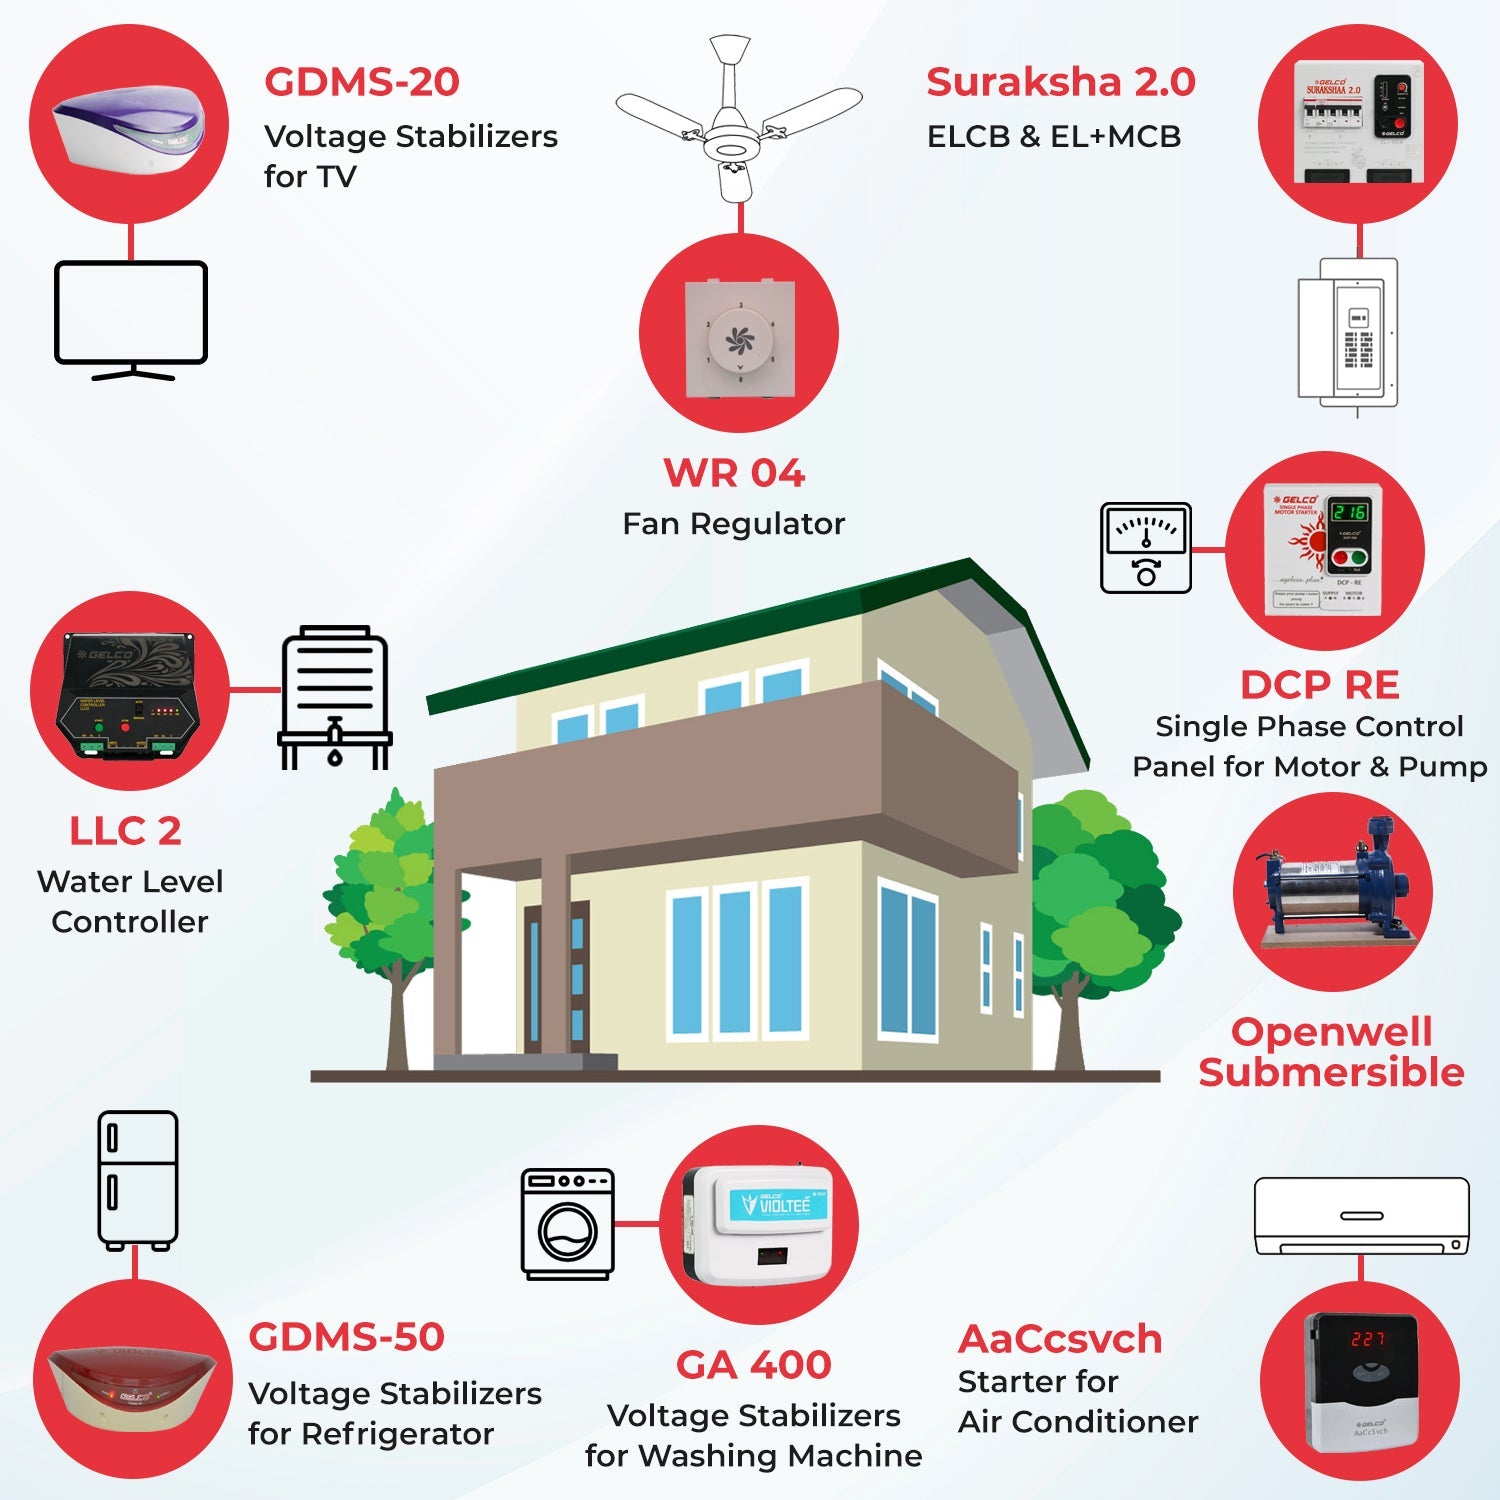 Gelco's Home & Personal Safety Standard Combo For 2-BHK Single Phase Flat, Suraksha (MCB+ELCB) For Personal Safety, Morden Switch For A.C., Stabilizer For TV/Computer & Refrigerator and Fan Regulators, Comfort Combos - Gelco Electronics Pvt. Ltd.